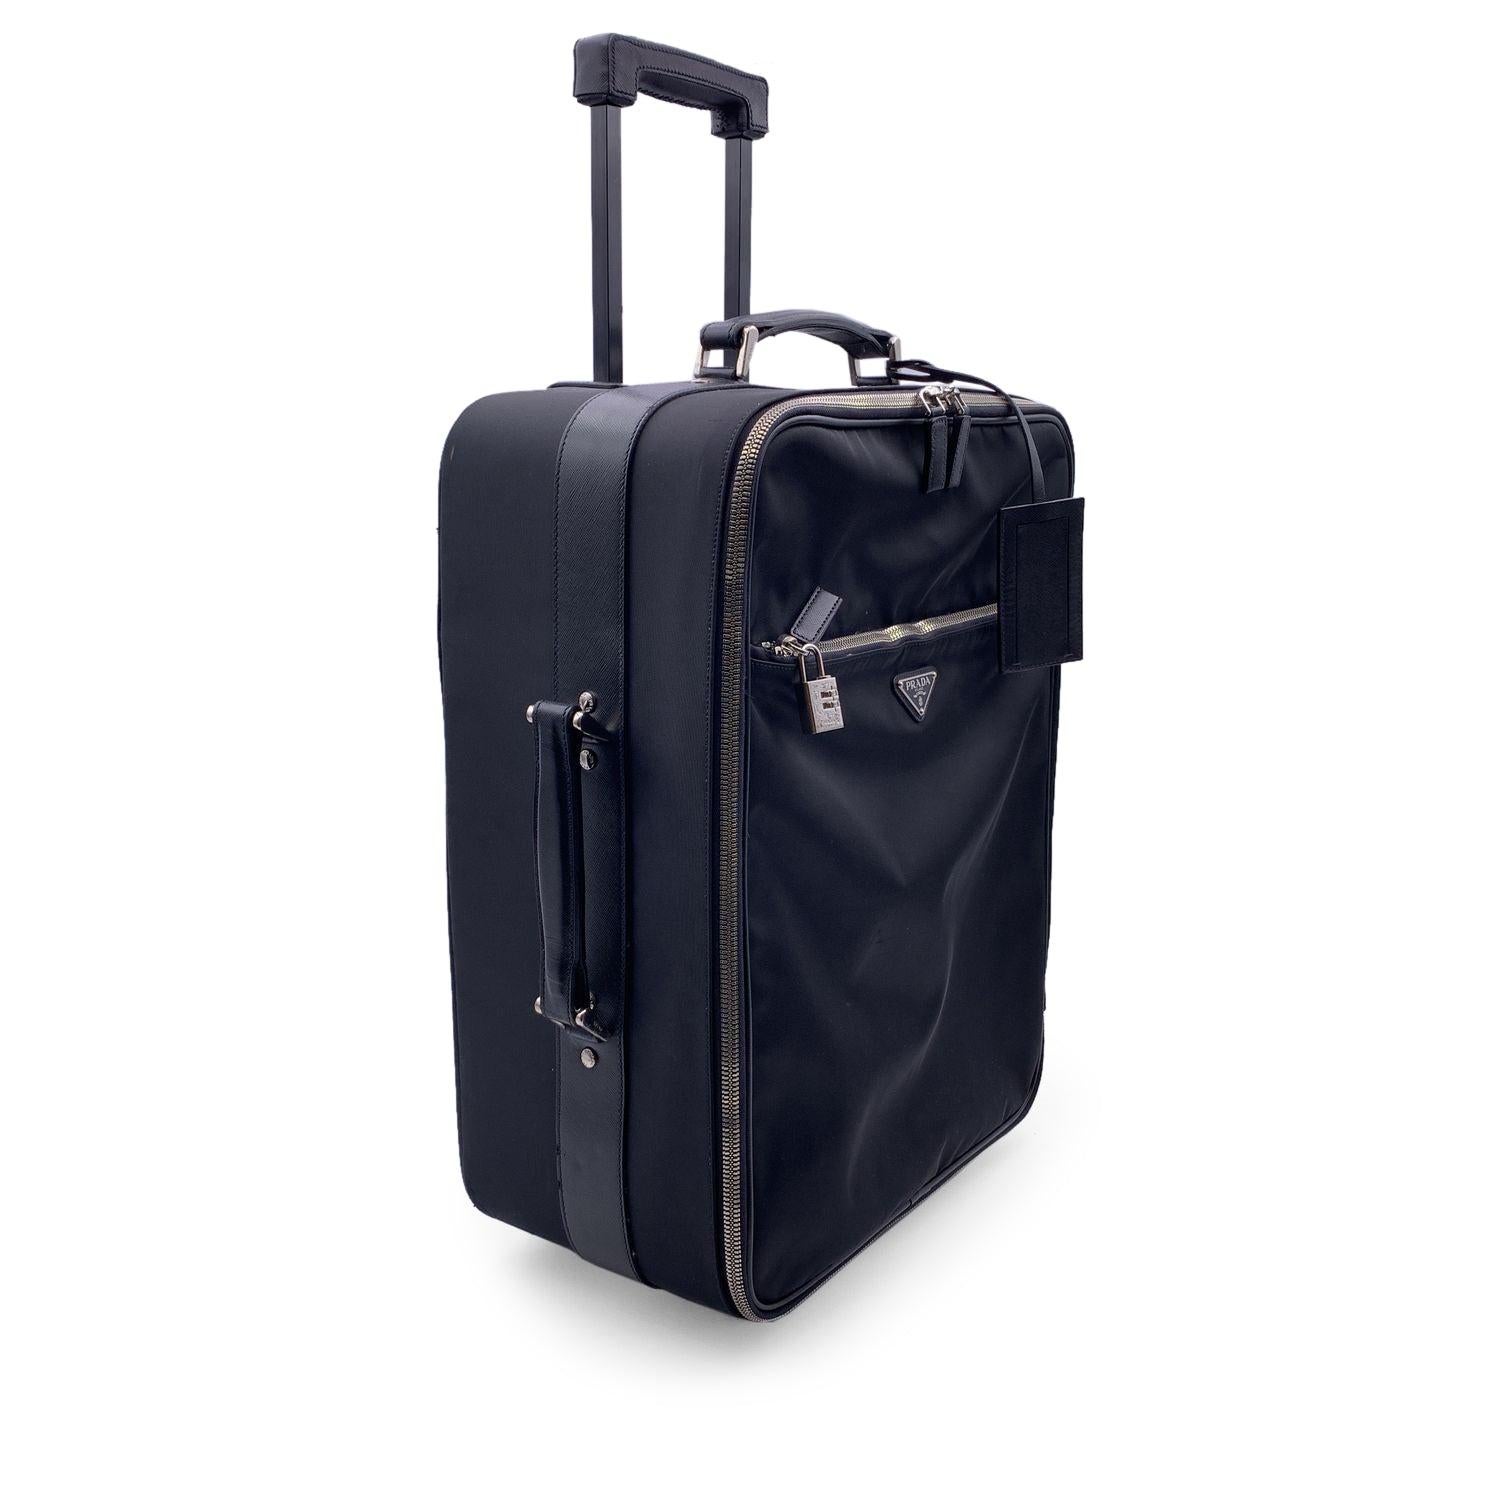 Gorgeous Prada Rolling Luggage Trolley travel bag. Black nylon, saffiano leather trim and fabric lining. Prada triangle logo on the front. Silver metal hardware. Double zipper closure. 1 front zip pocket and 1 rear zip pocket . Top handle and side